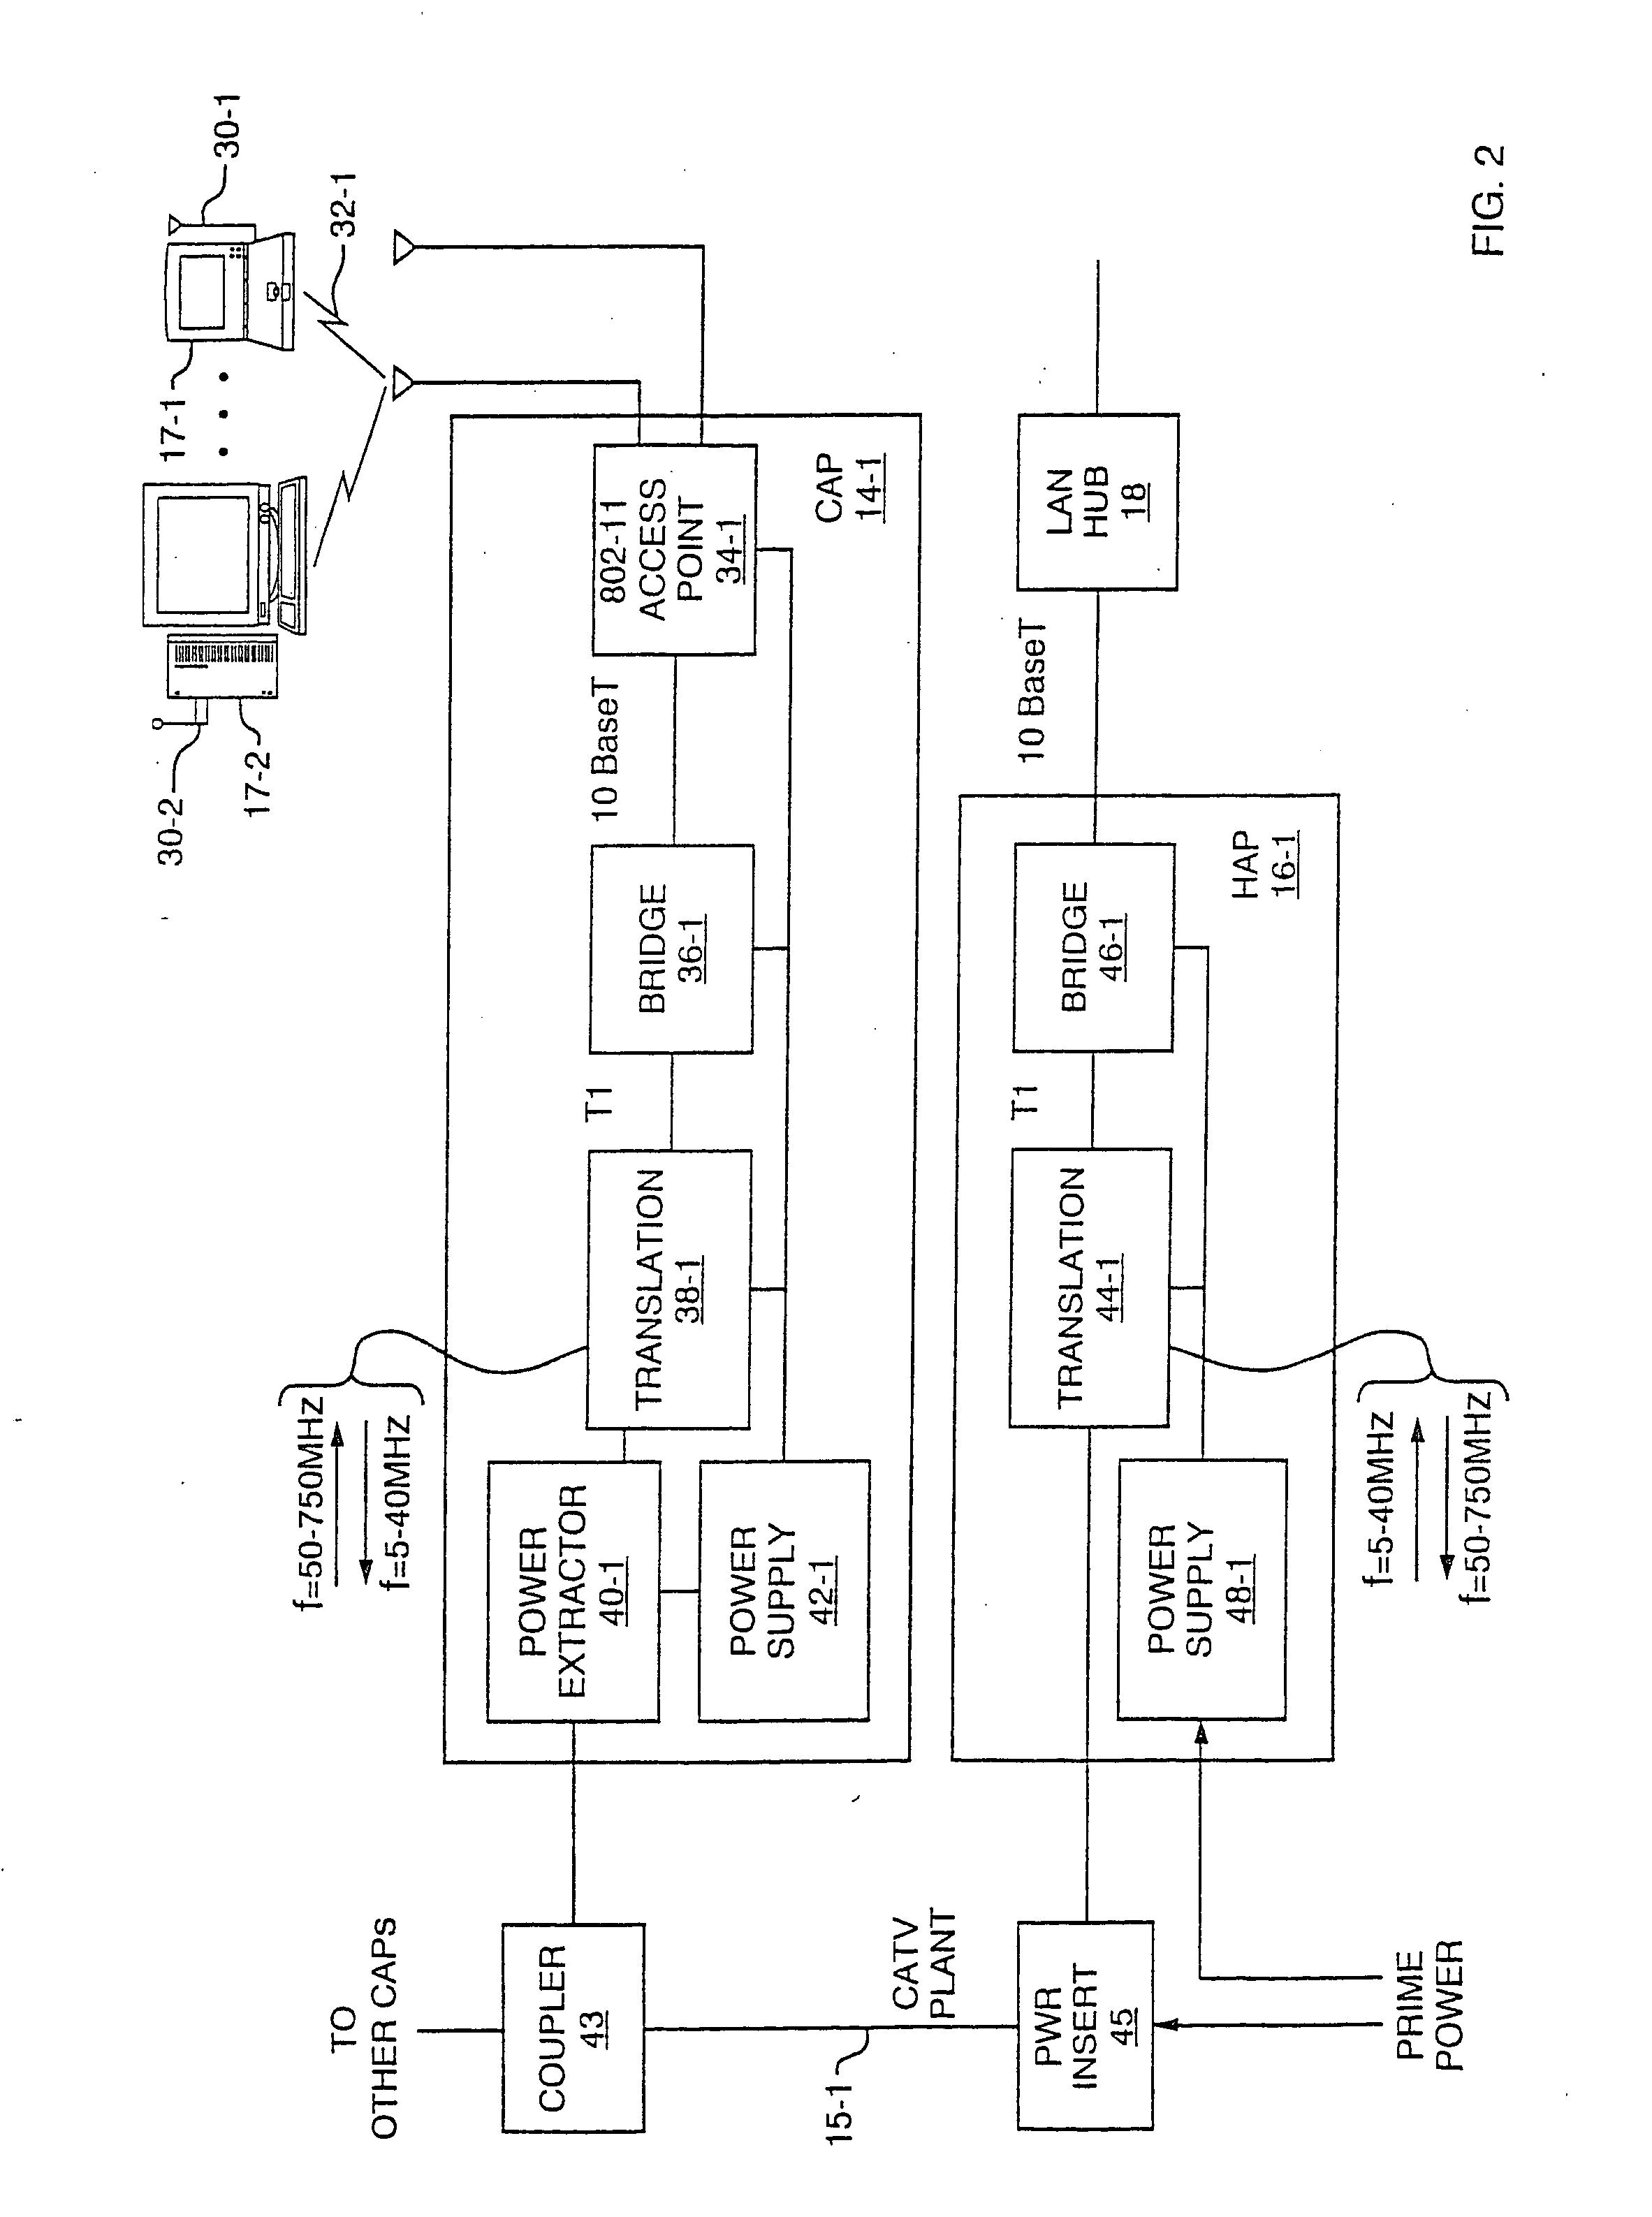 Architecture for signal distribution in wireless data network